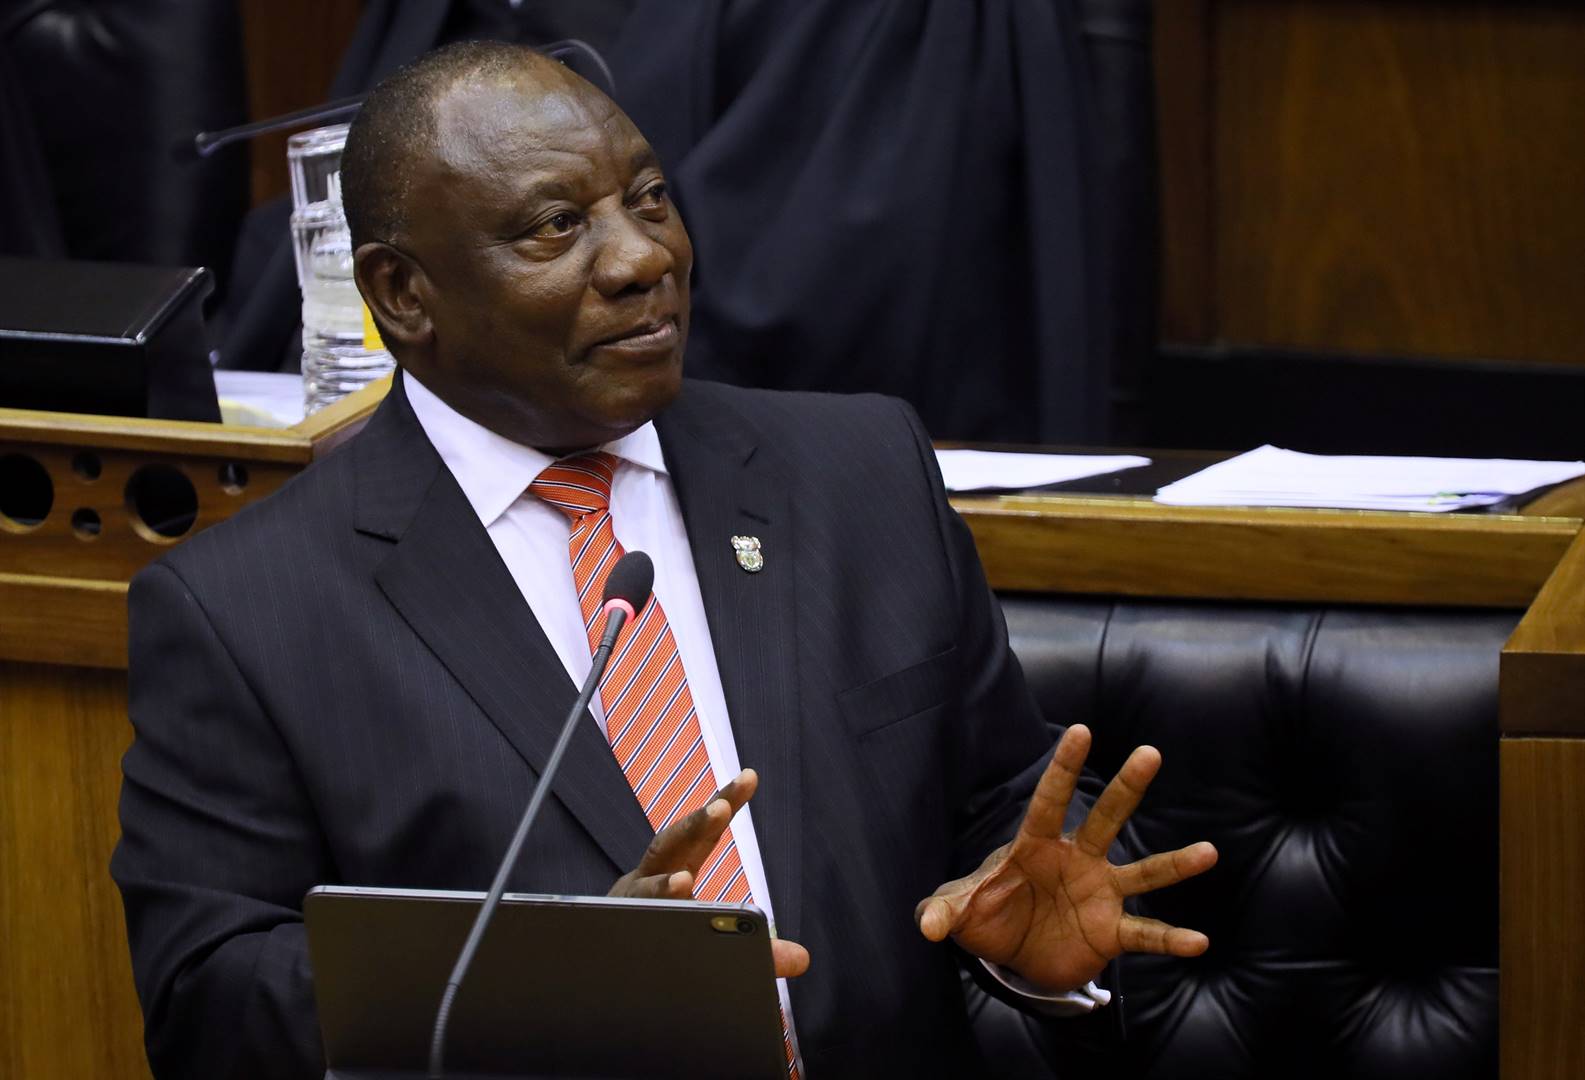 President Cyril Ramaphosa delivers his State of the Nation address. Picture: Sumaya Hisham/Reuters